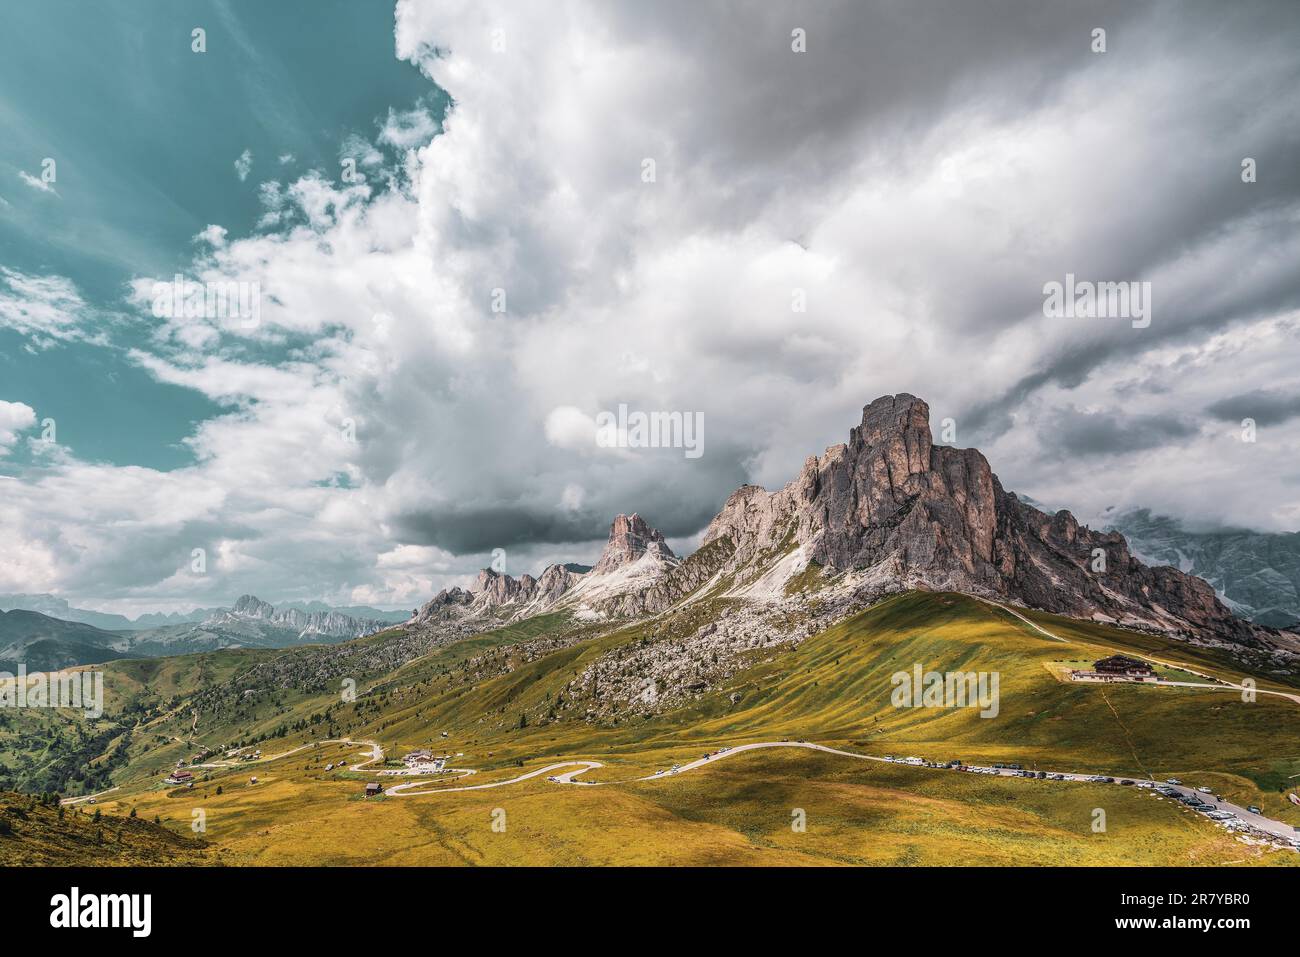 The Nuvolau mountain group from Giau Pass in the Ampezzo Dolomites Stock Photo